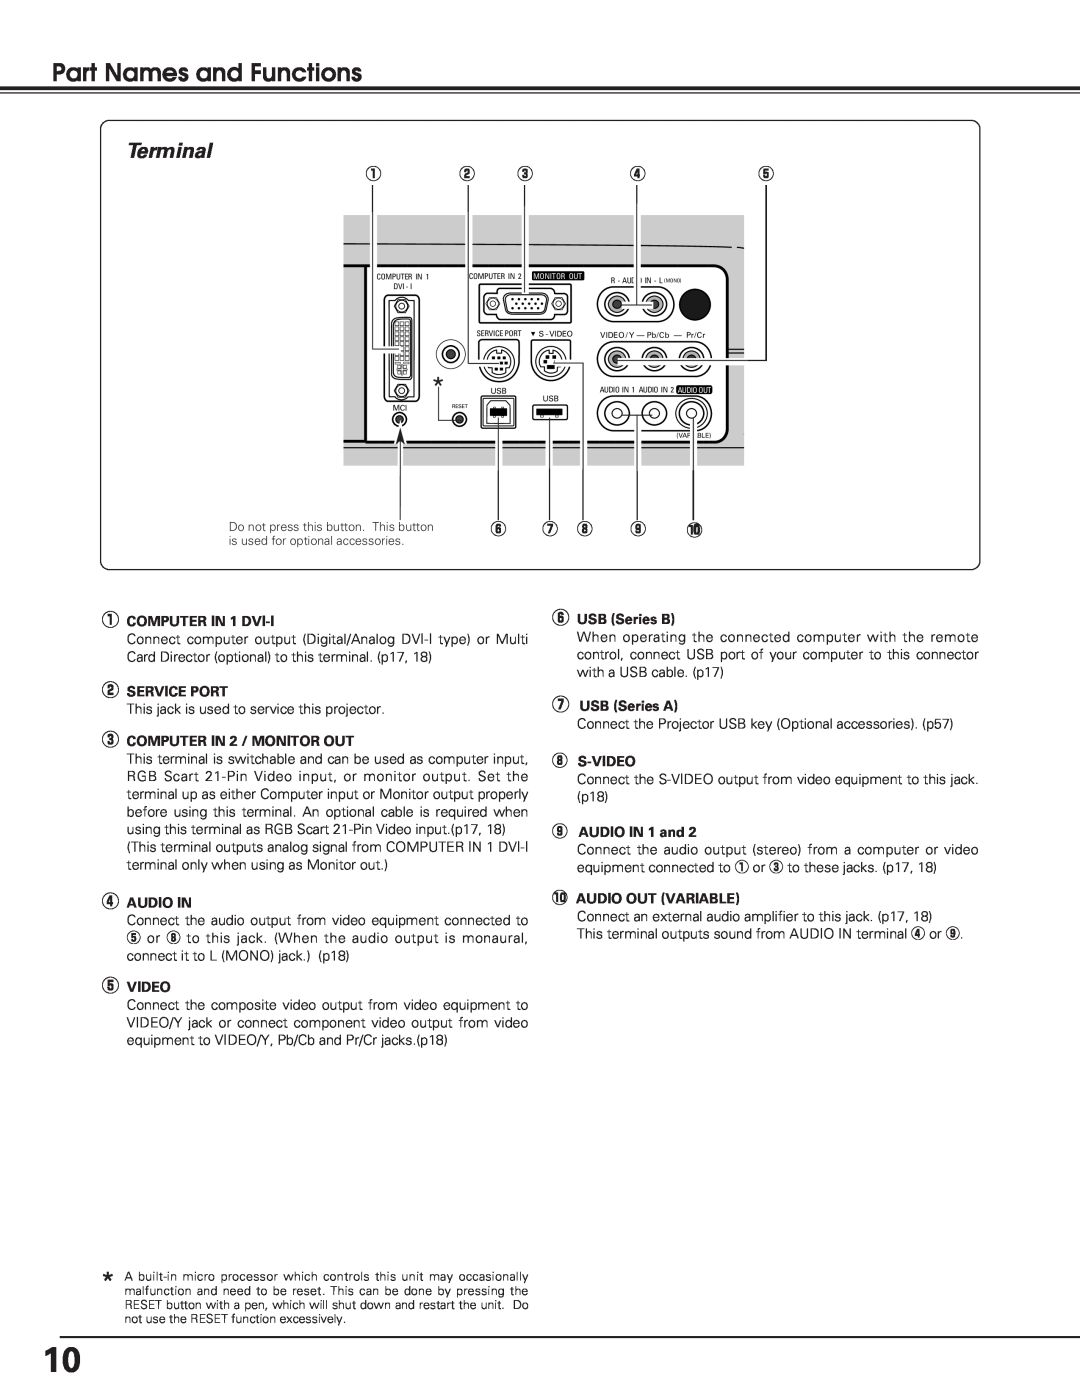 Eiki LC-XE10 instruction manual Part Names and Functions, Terminal, This jack is used to service this projector 